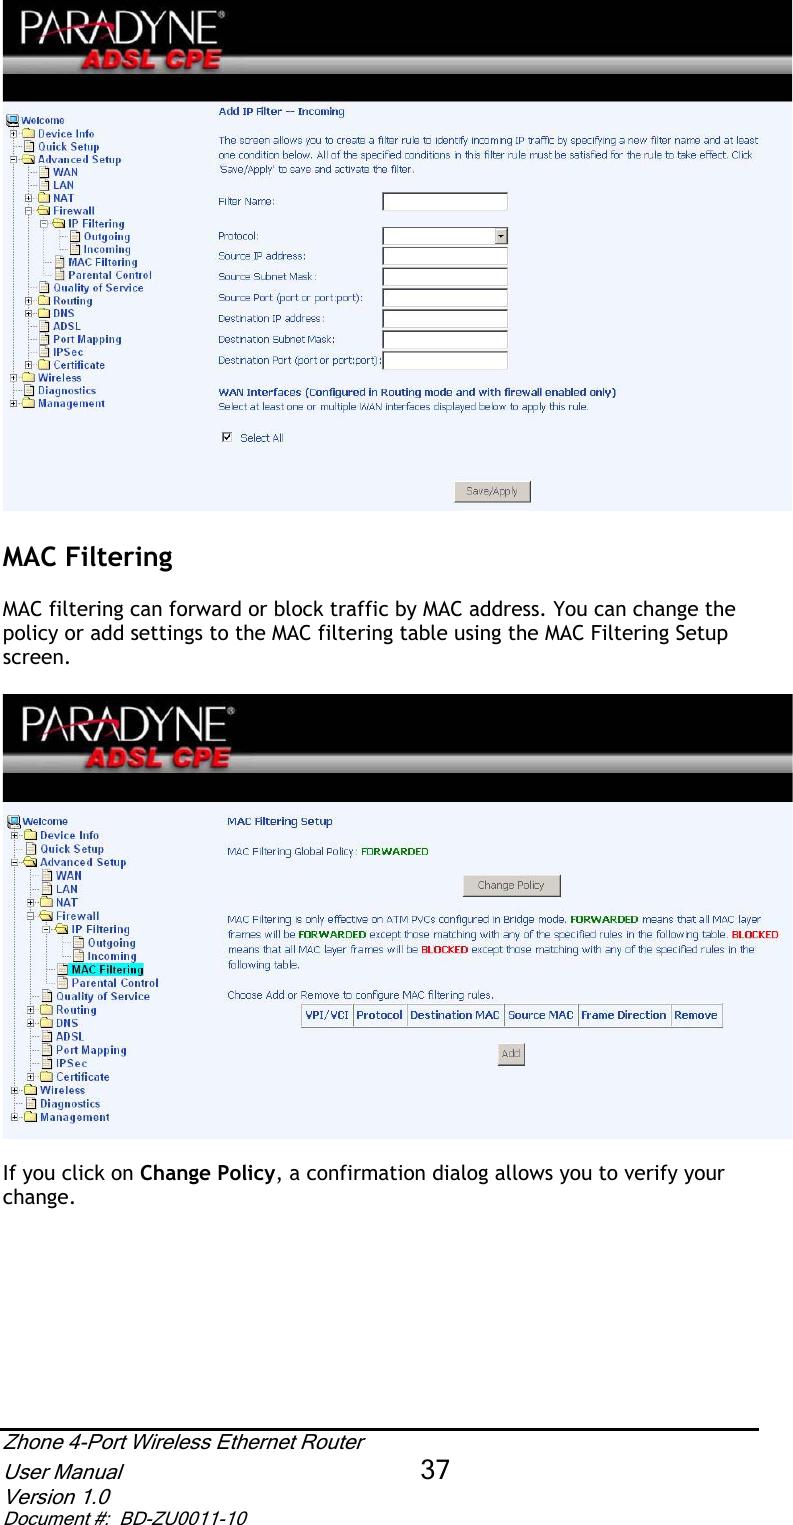 MAC FilteringMAC filtering can forward or block traffic by MAC address. You can change the policy or add settings to the MAC filtering table using the MAC Filtering Setup screen.If you click on Change Policy, a confirmation dialog allows you to verify your change.Zhone 4-Port Wireless Ethernet Router User Manual 37Version 1.0 Document #:  BD-ZU0011-10